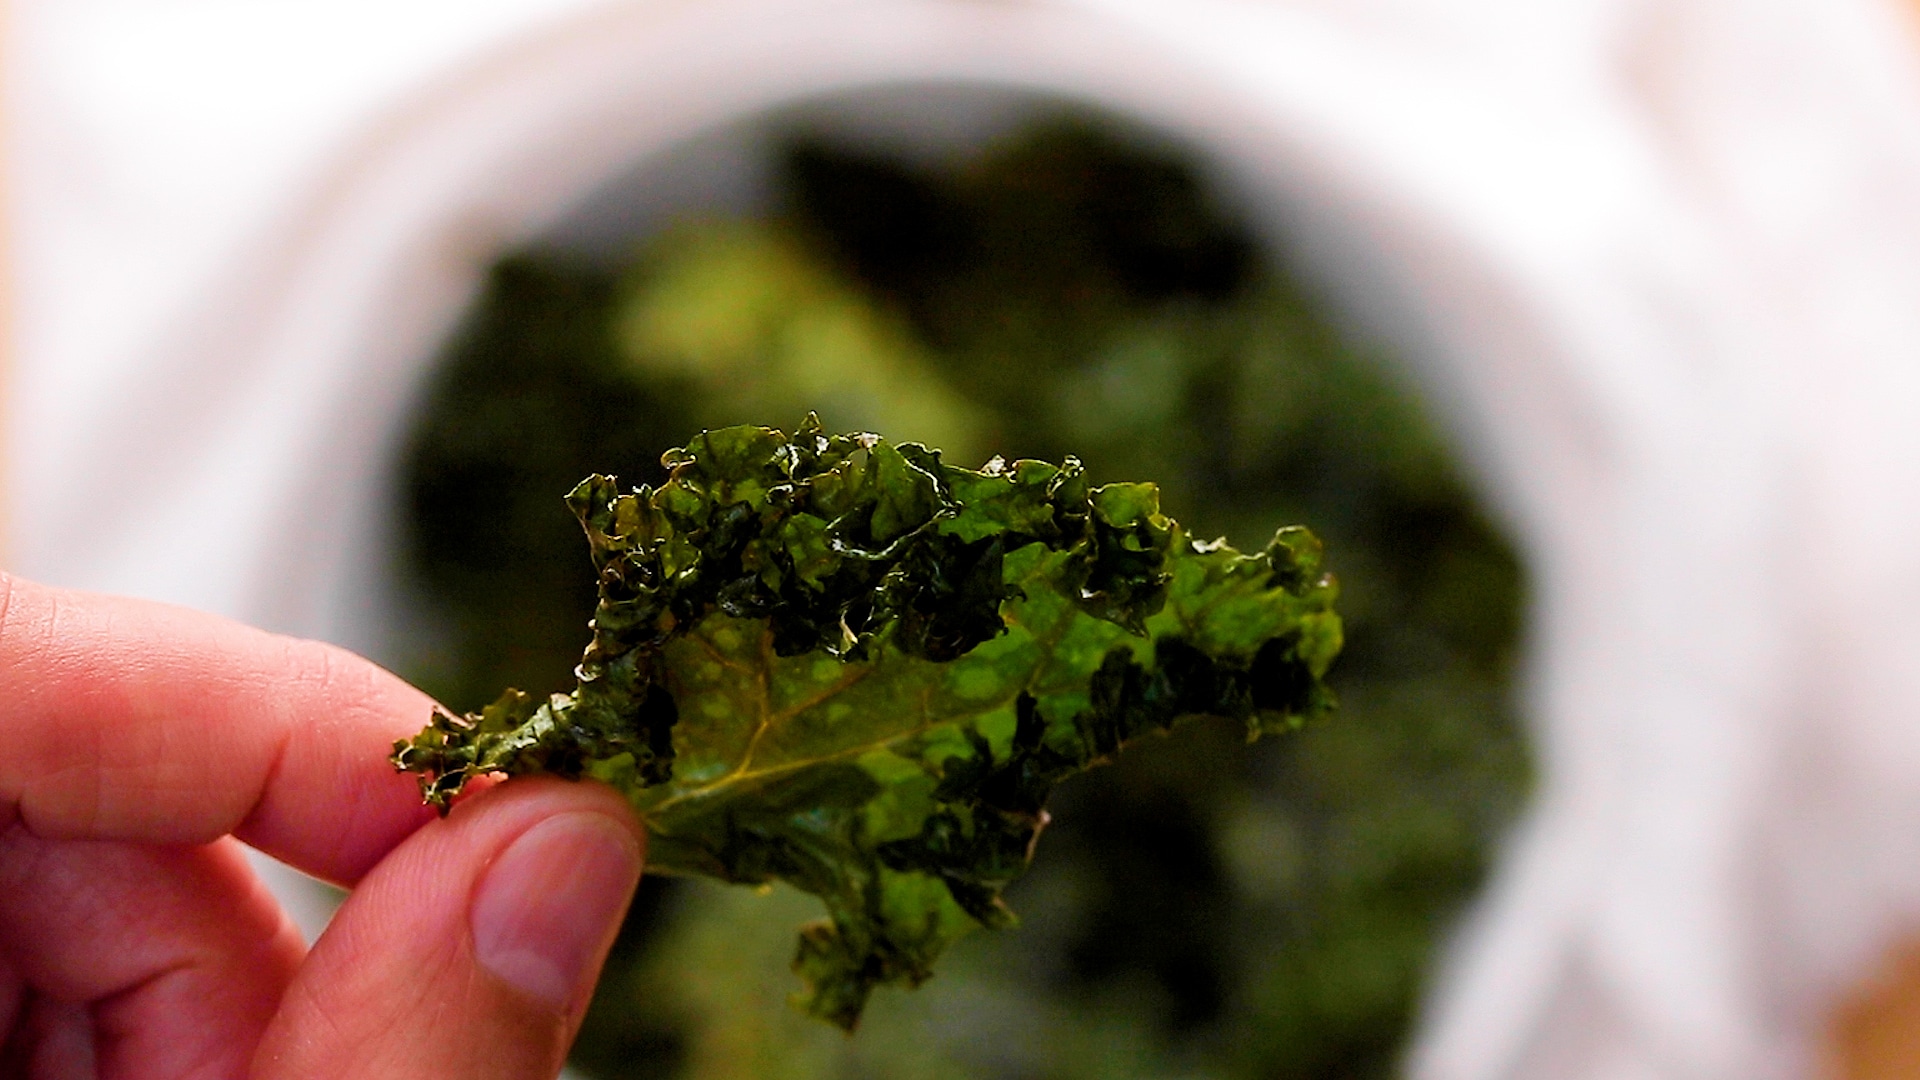 A crispy kale chip pinched between a a thumb and forefinger being brought in front of the camera right before being eaten